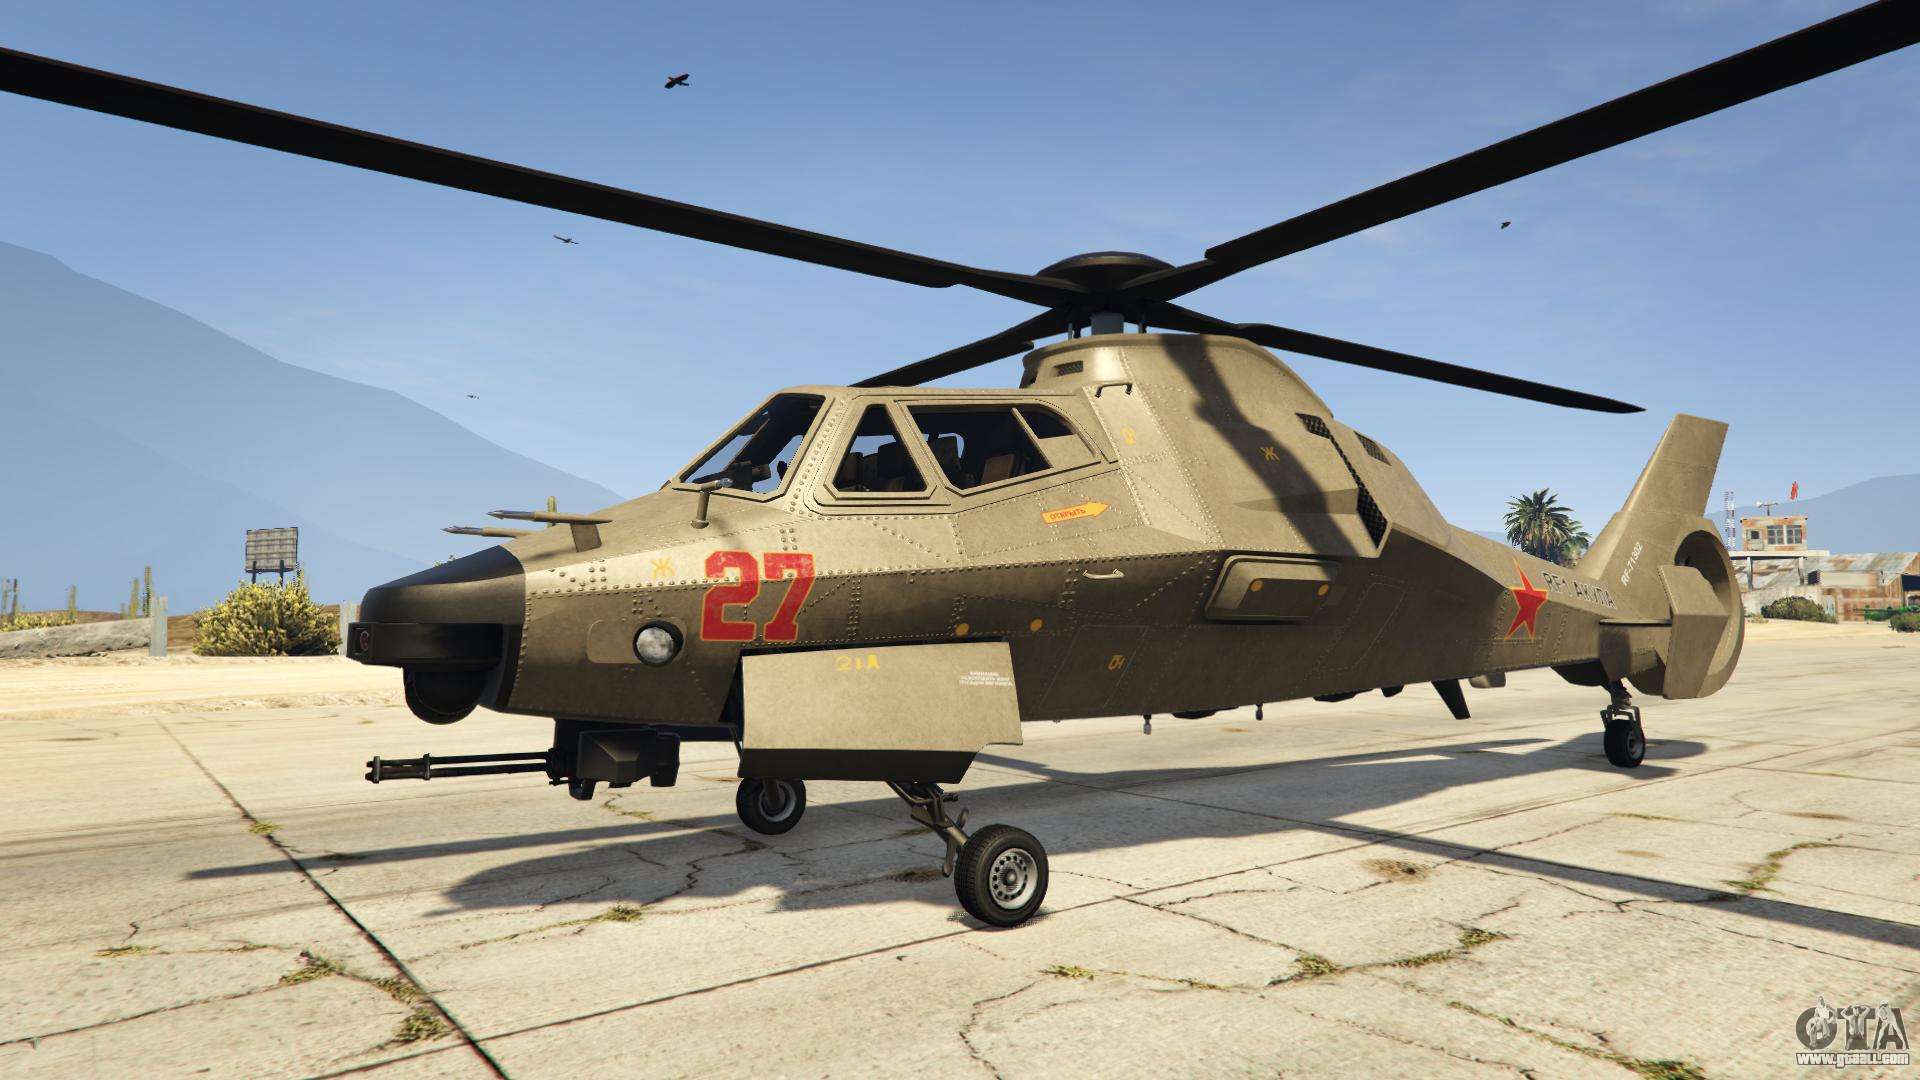 Buckingham The Akula in GTA 5 Online where to find, discover and buy the  kind of real life description